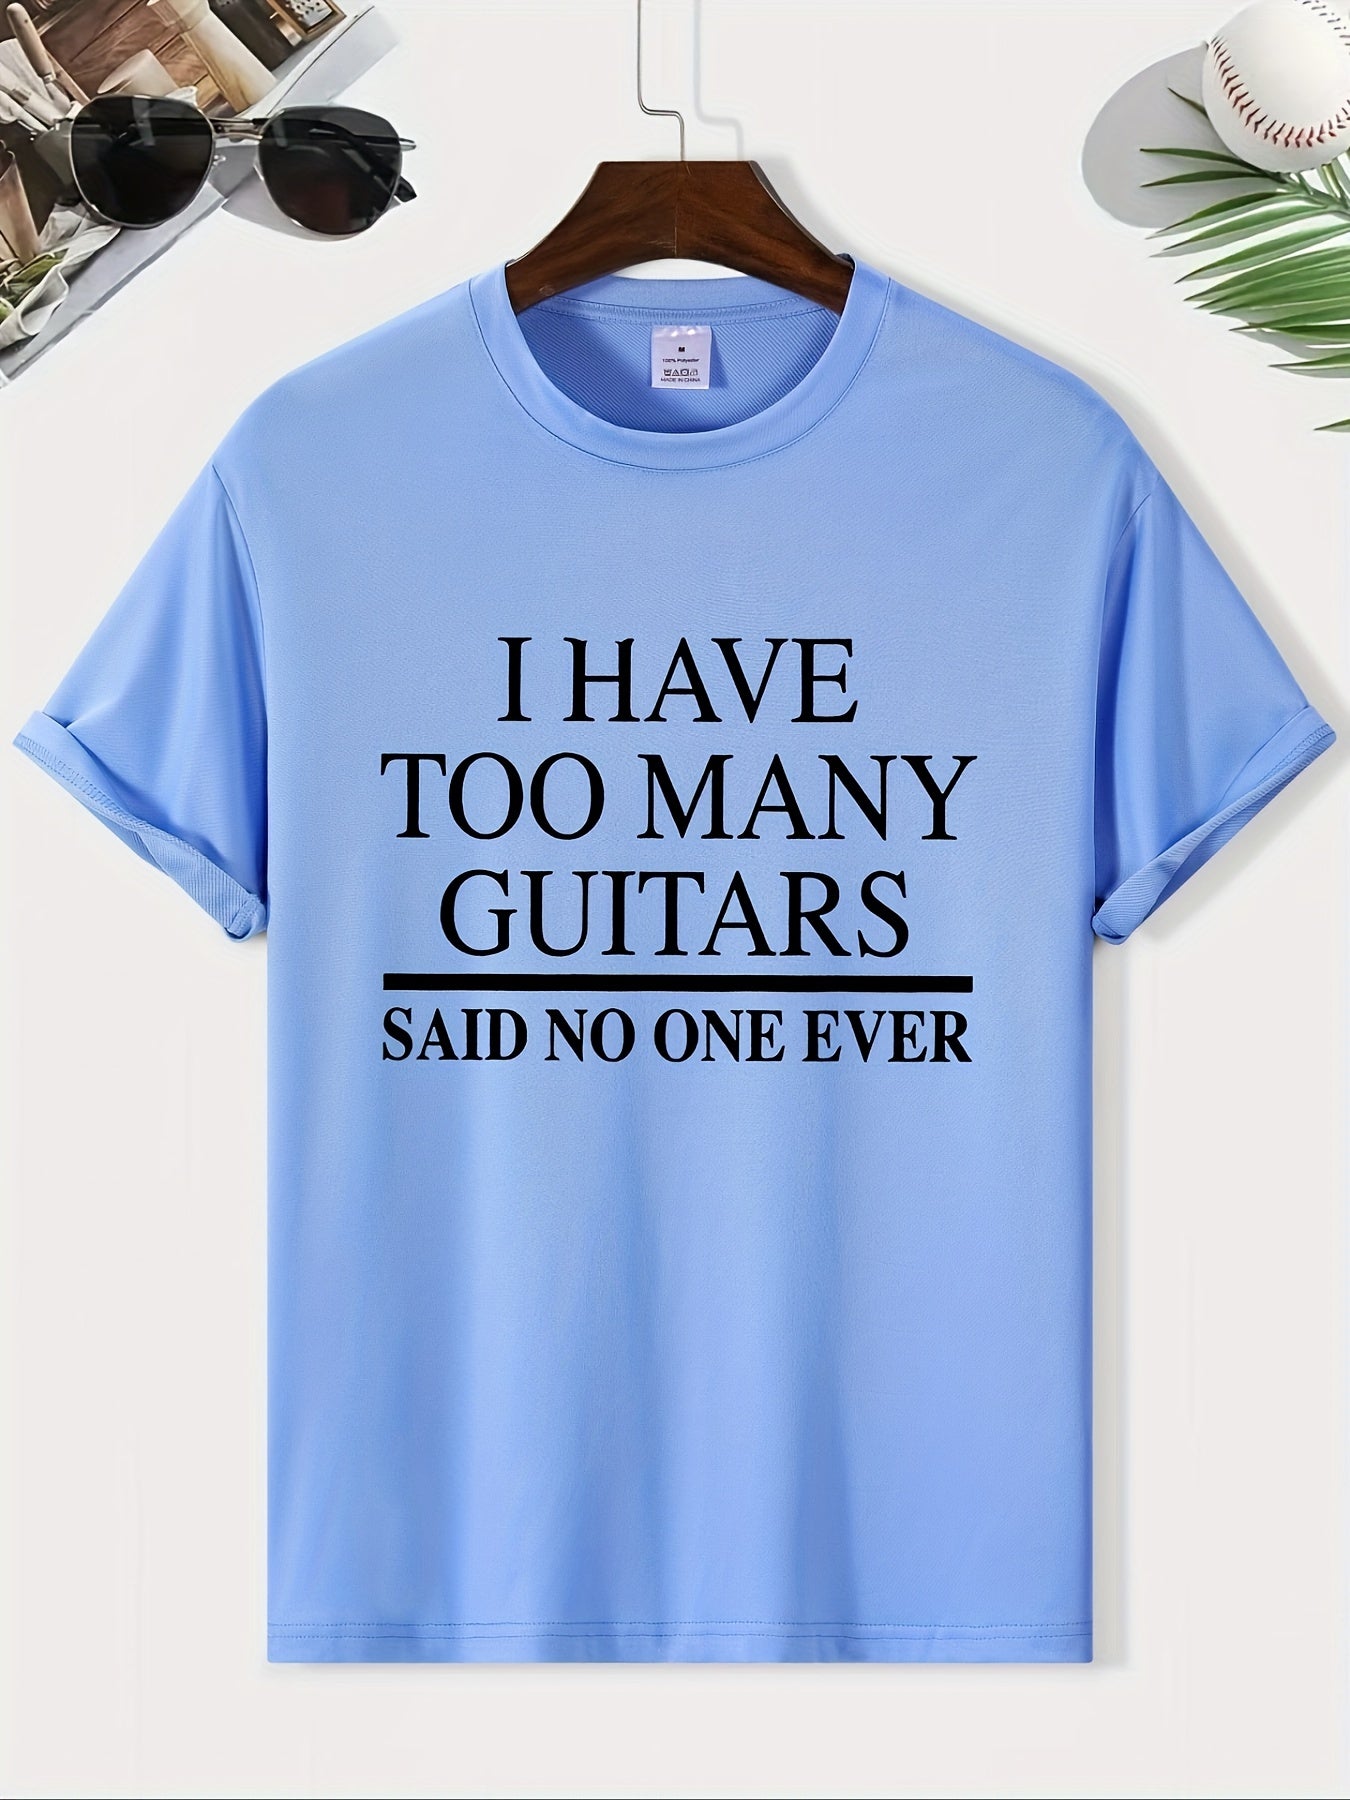 Tees For Men, Funny 'Too Many Guitars' Print T Shirt, Casual Short Sleeve Tshirt For Summer Spring Fall, Tops As Gifts, For Guitar Players